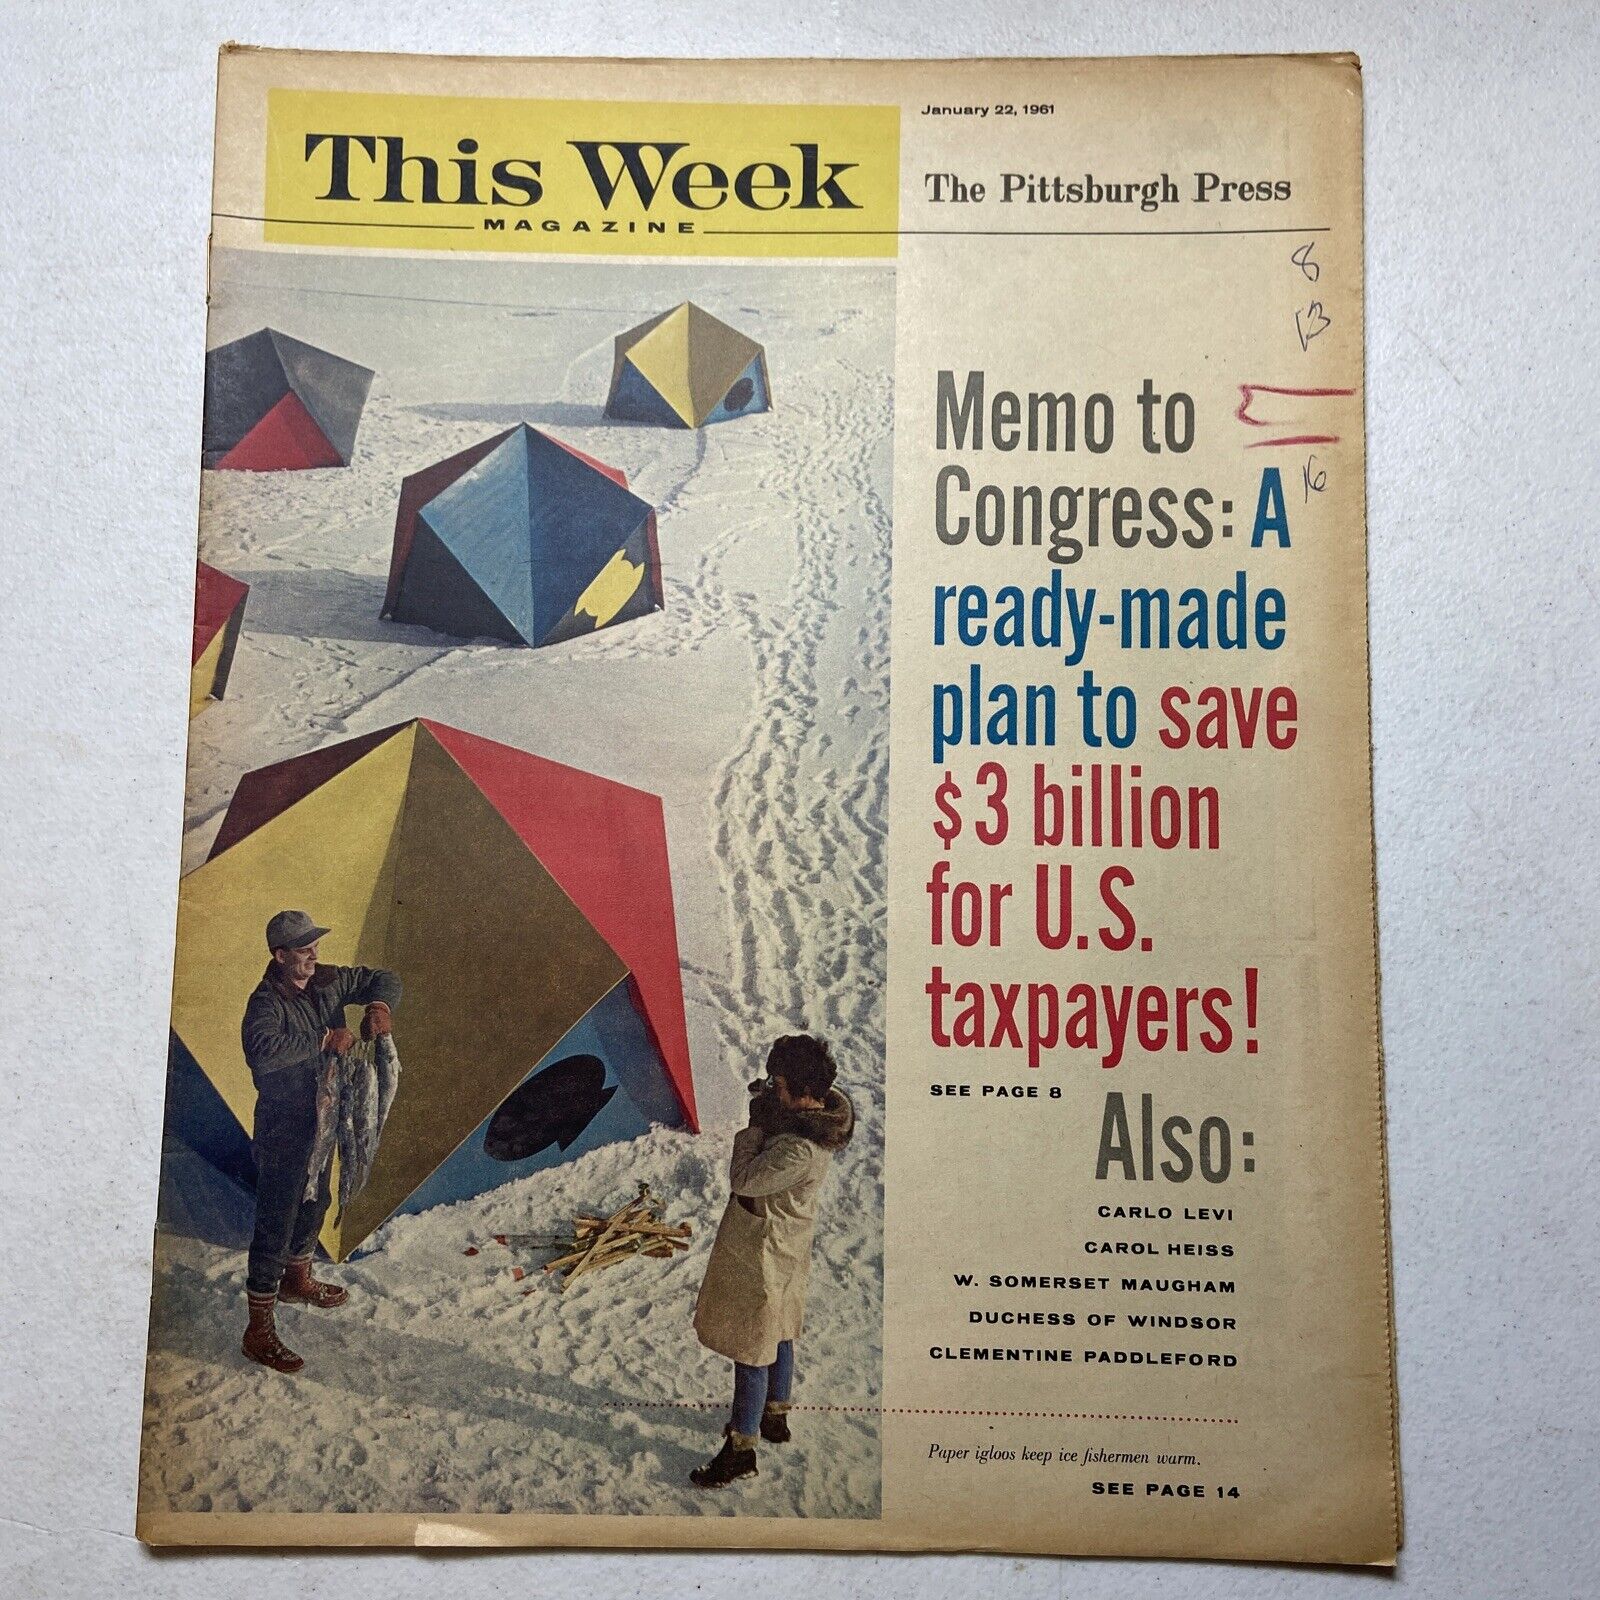 THIS WEEK Magazine - January 22, 1961 - Hoover Commission, Carol Heiss, Vtg Cars